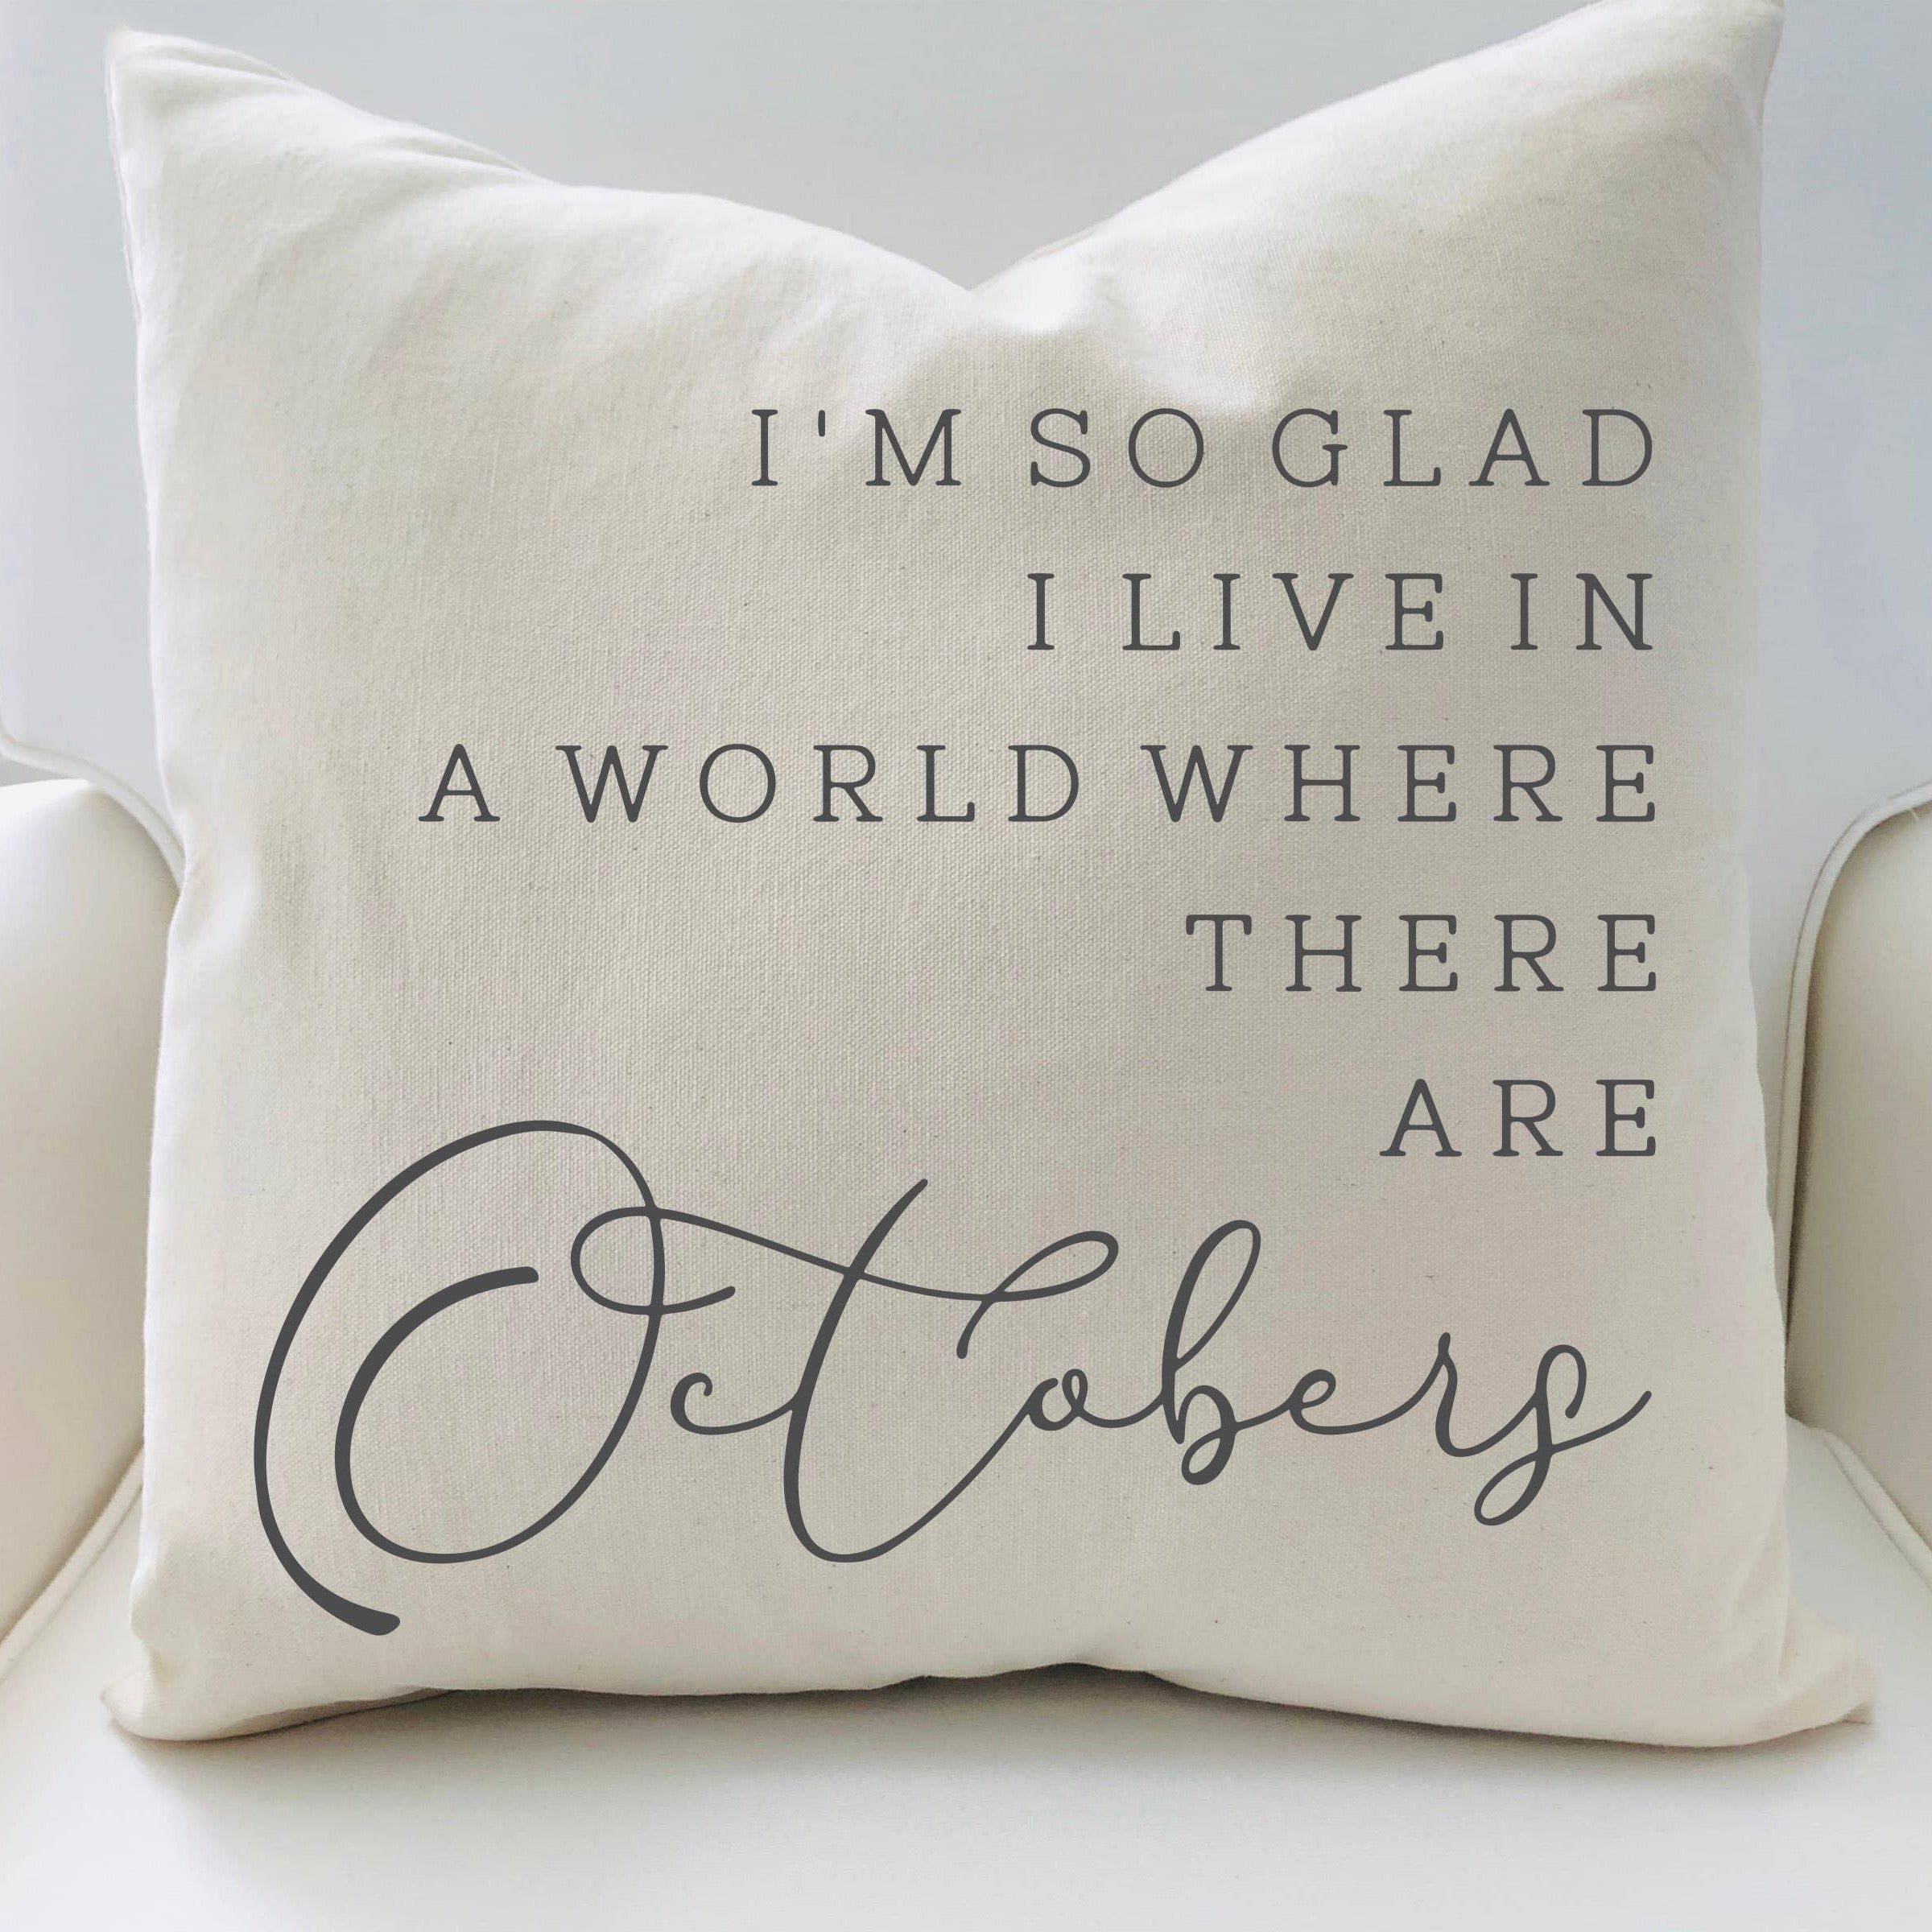 I'm so glad I live in a world...Octobers Pillow - Signastyle Boutique